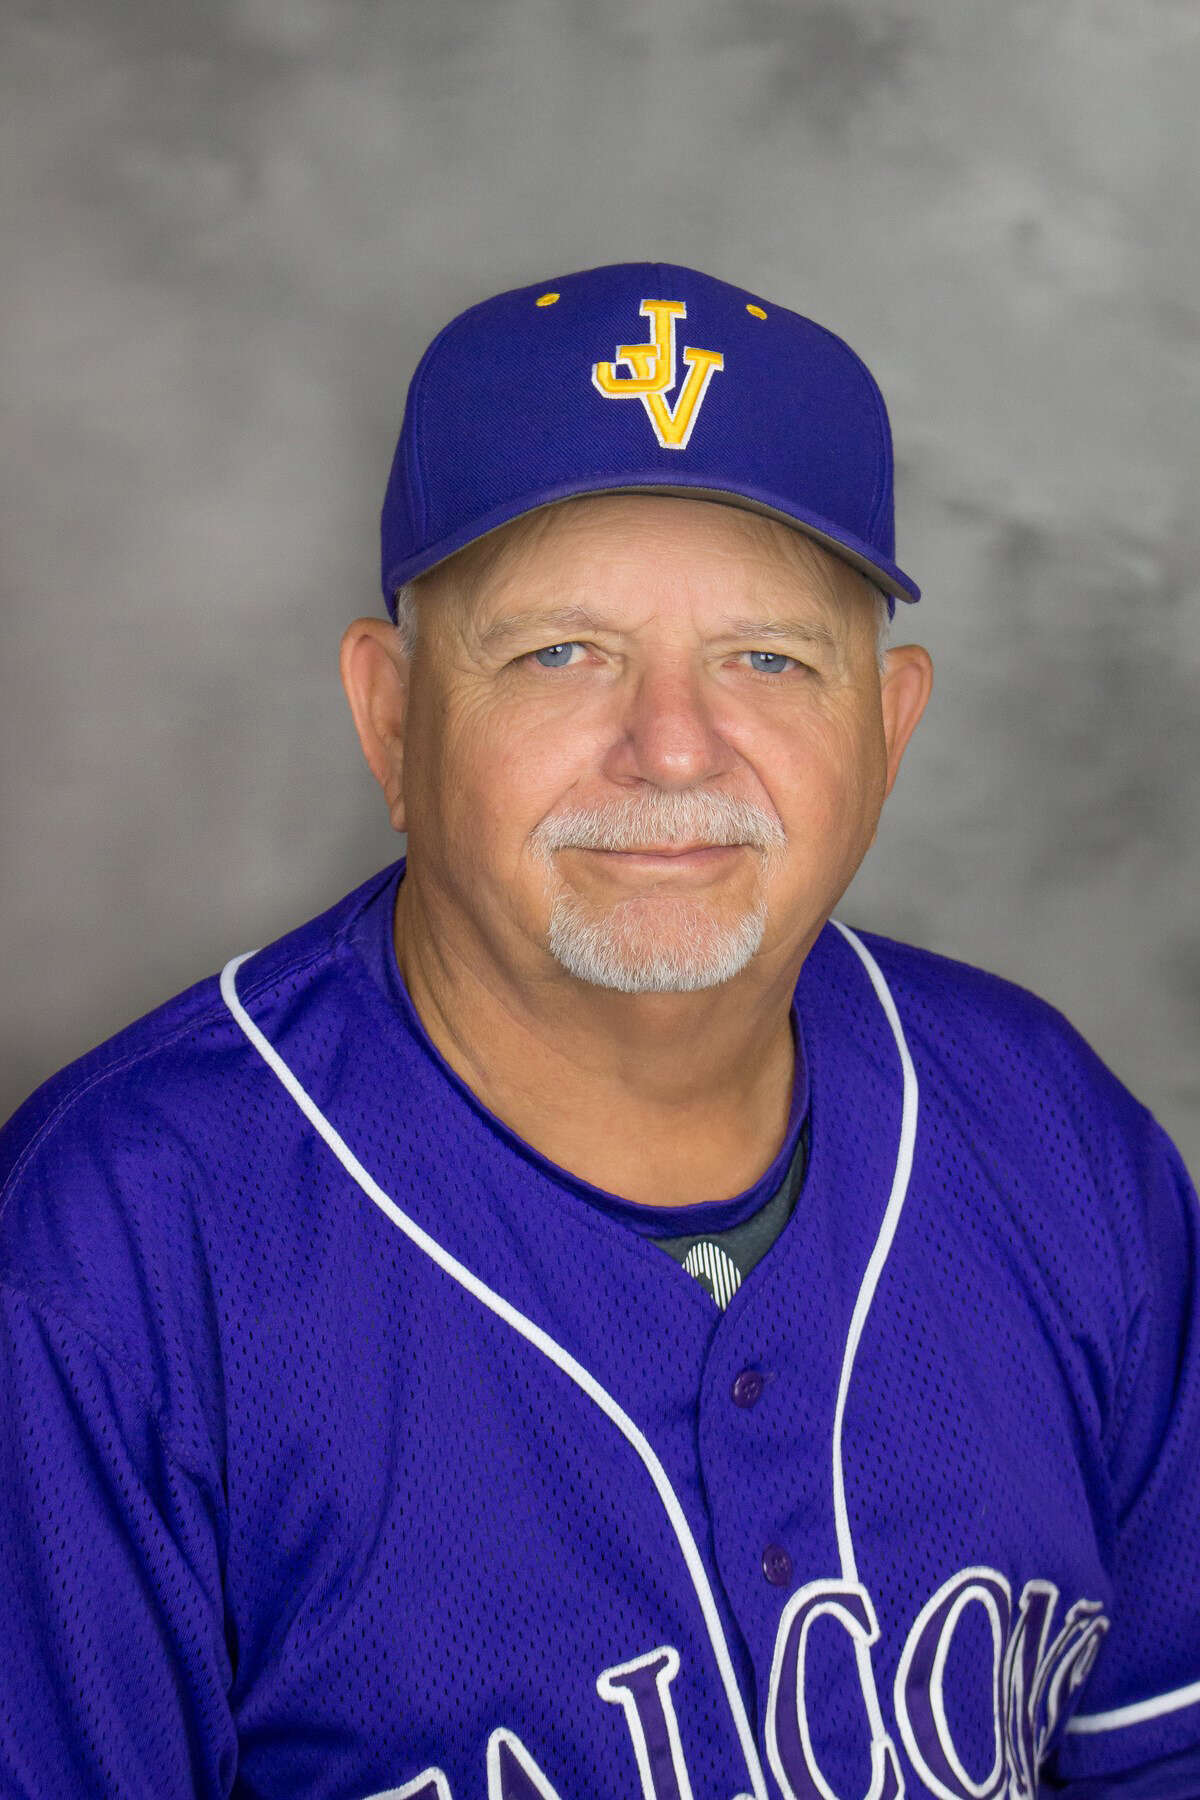 Michael MaddoxÂ  was the baseball coach at Jersey Village High School for all but three of his 32-year coaching career. He finished with 527 wins and 17 playoff appearances, retiring from teaching in 2014. Last January, Maddox was inducted into the Texas High School Baseball Coaches Association Hall of Fame in Waco.